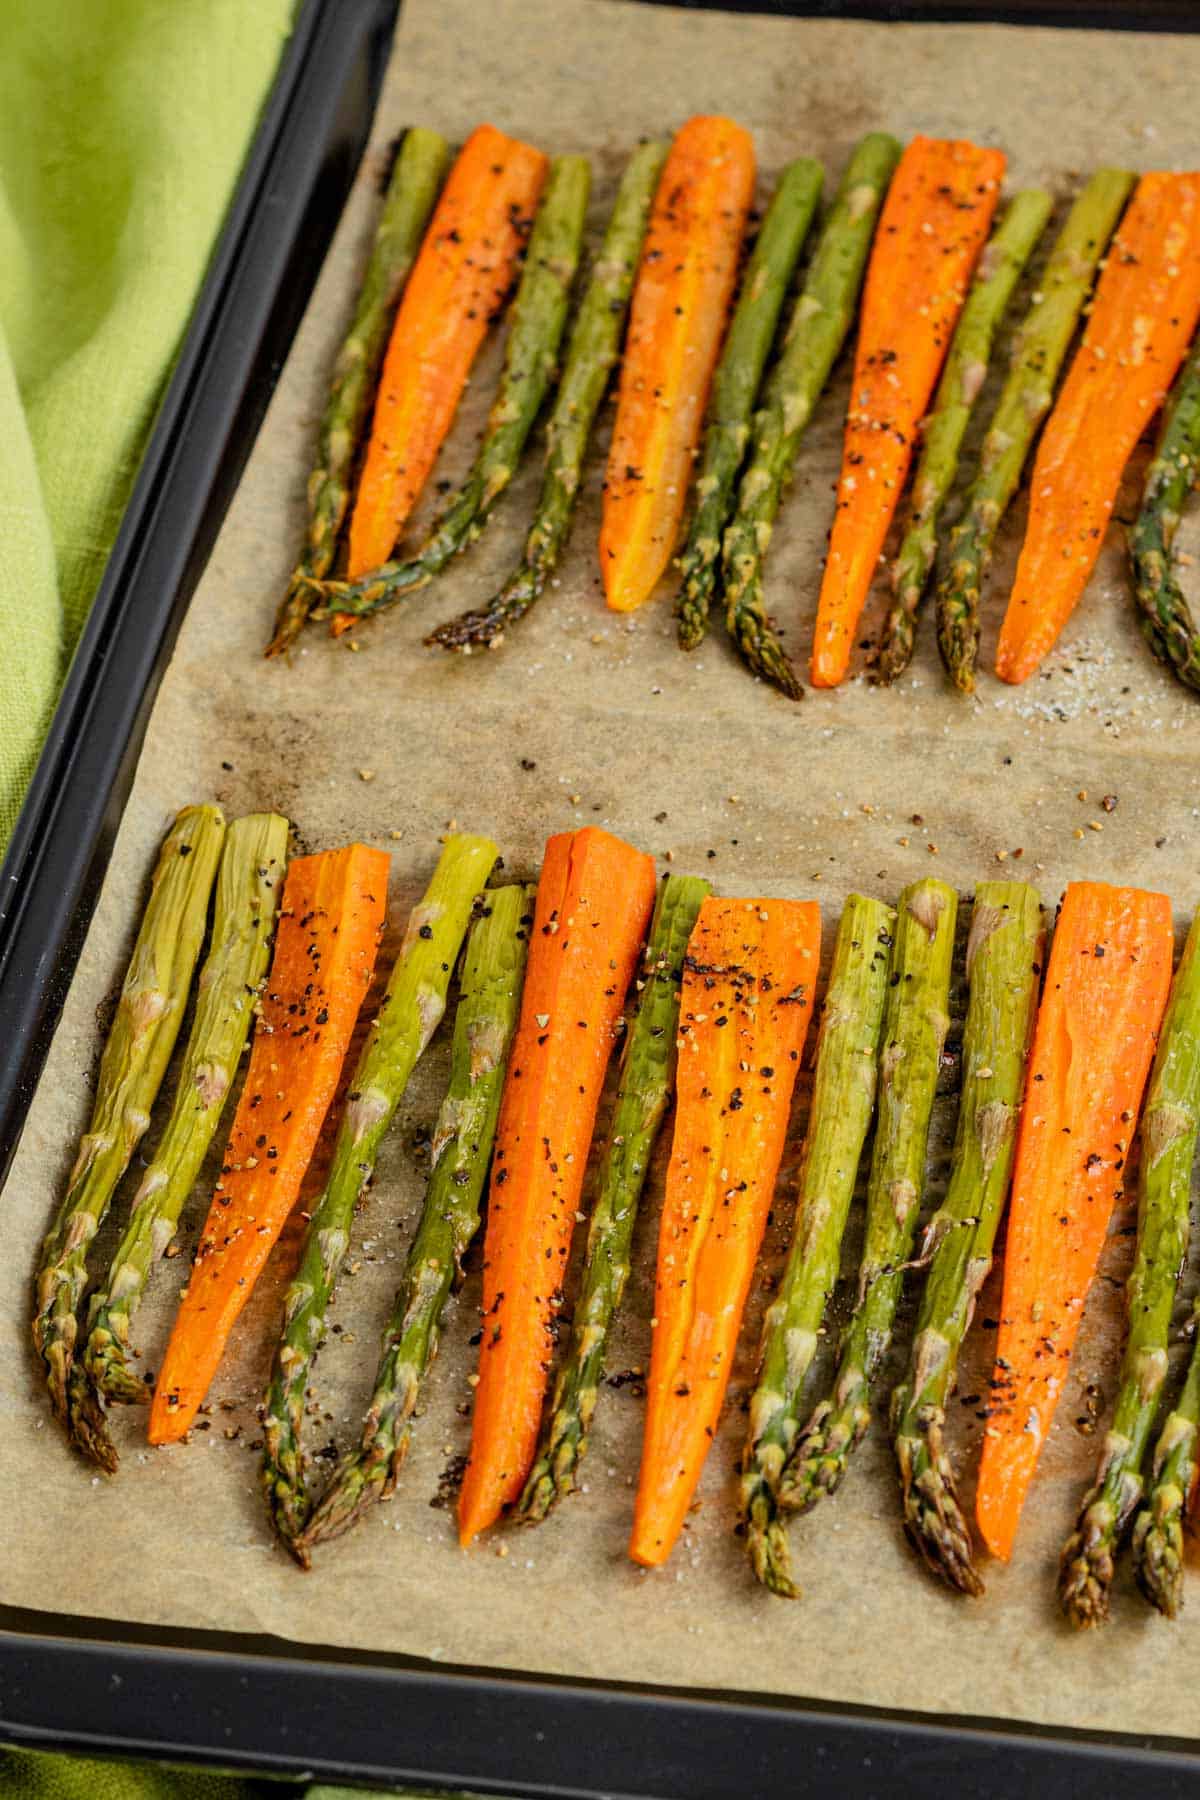 asparagus in the oven with carrots on a baking sheet